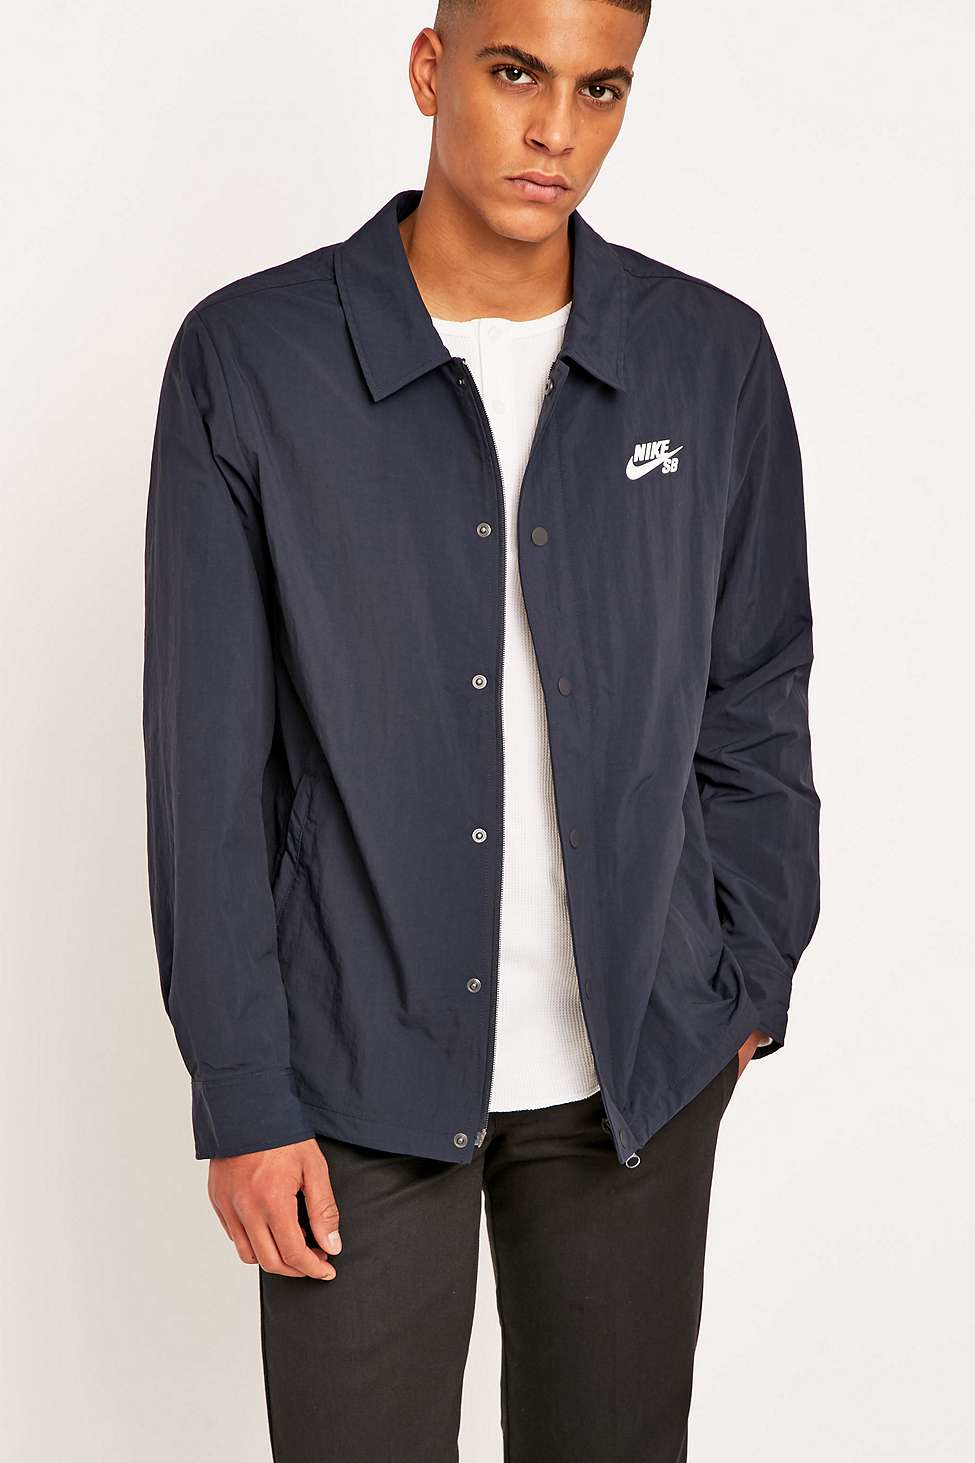 Nike Navy Coaches Jacket in Blue for Men - Lyst